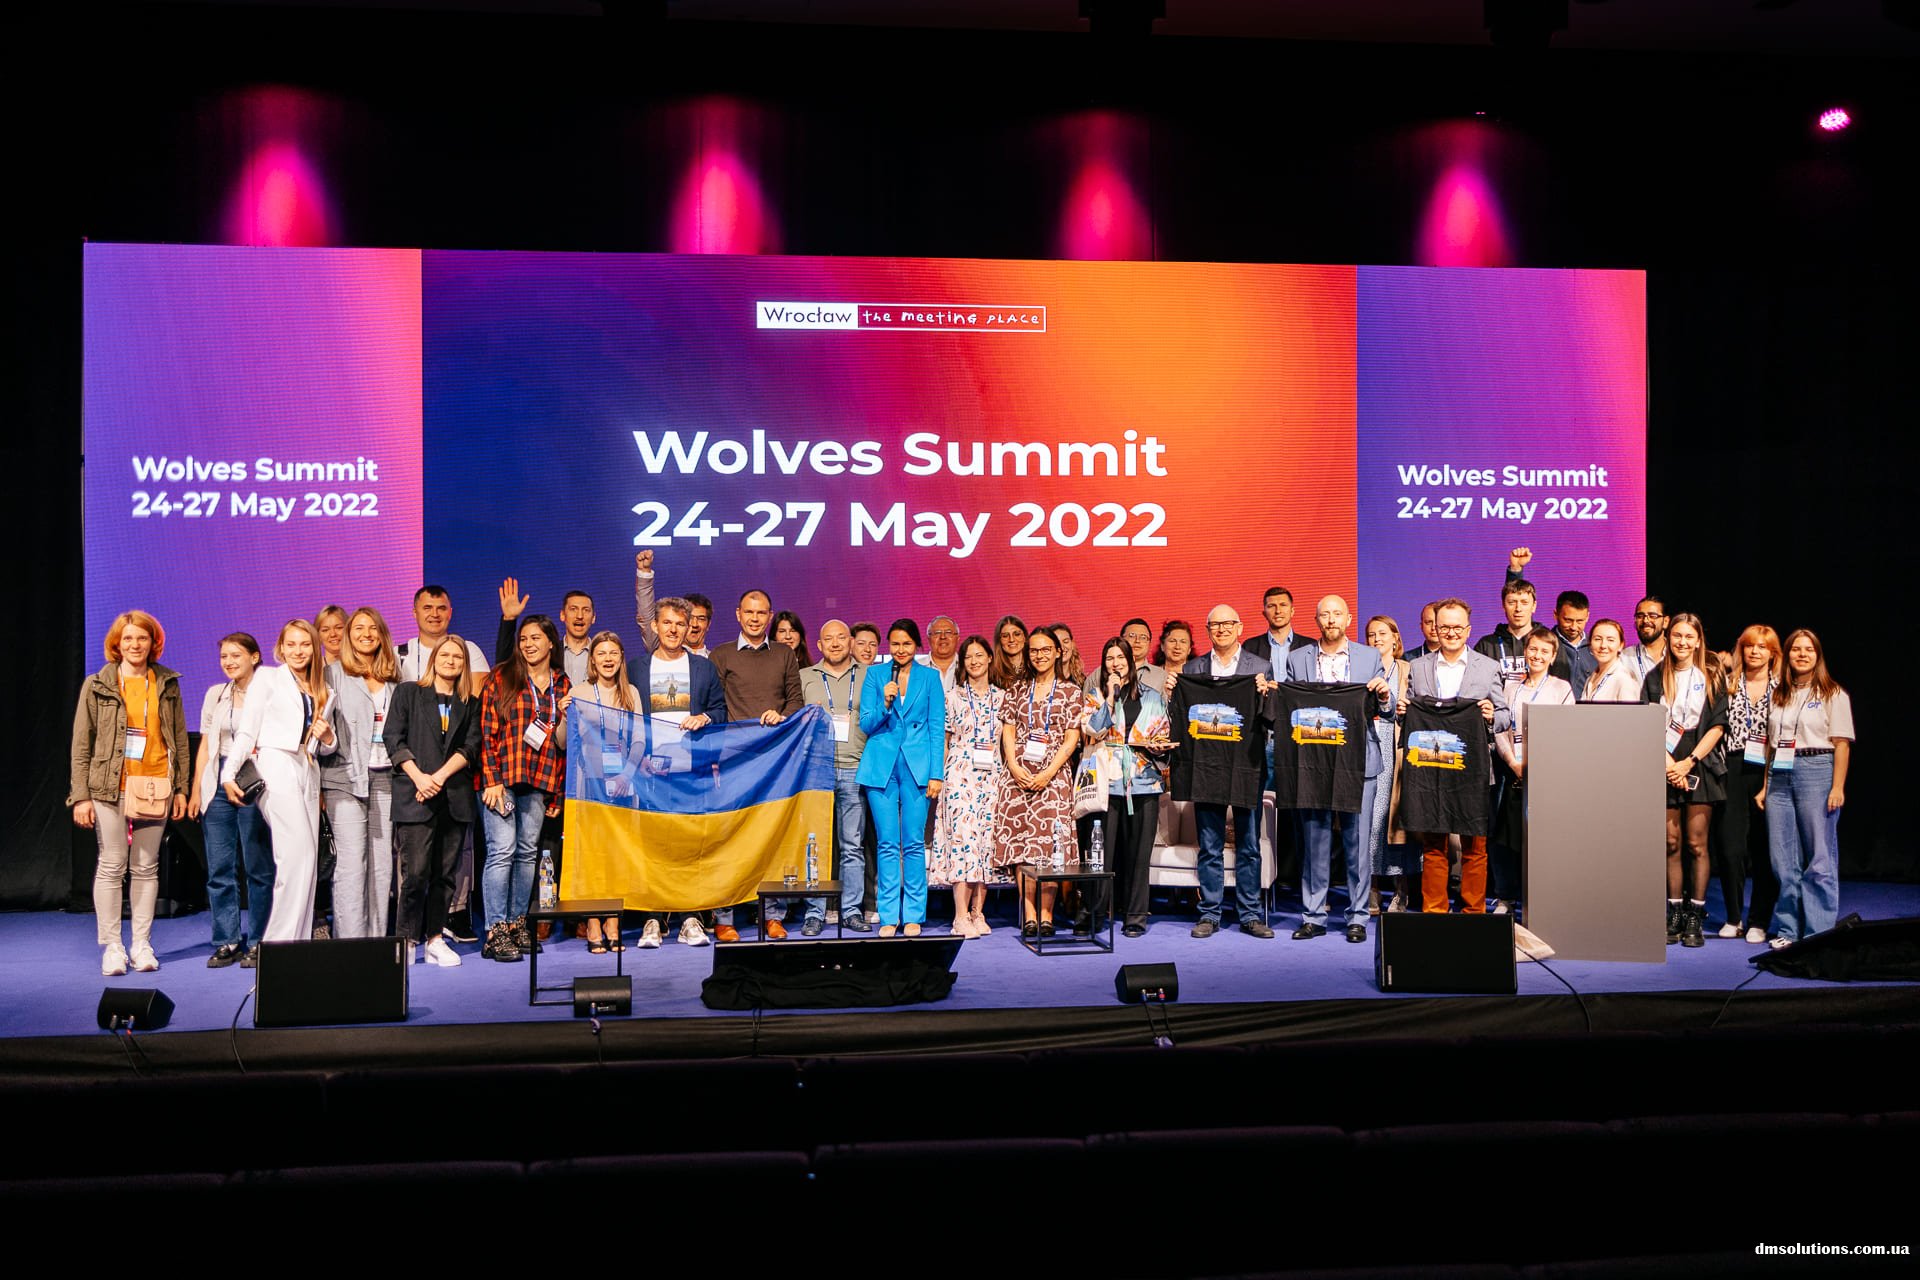 Wolves Summit 2022 successfully completed